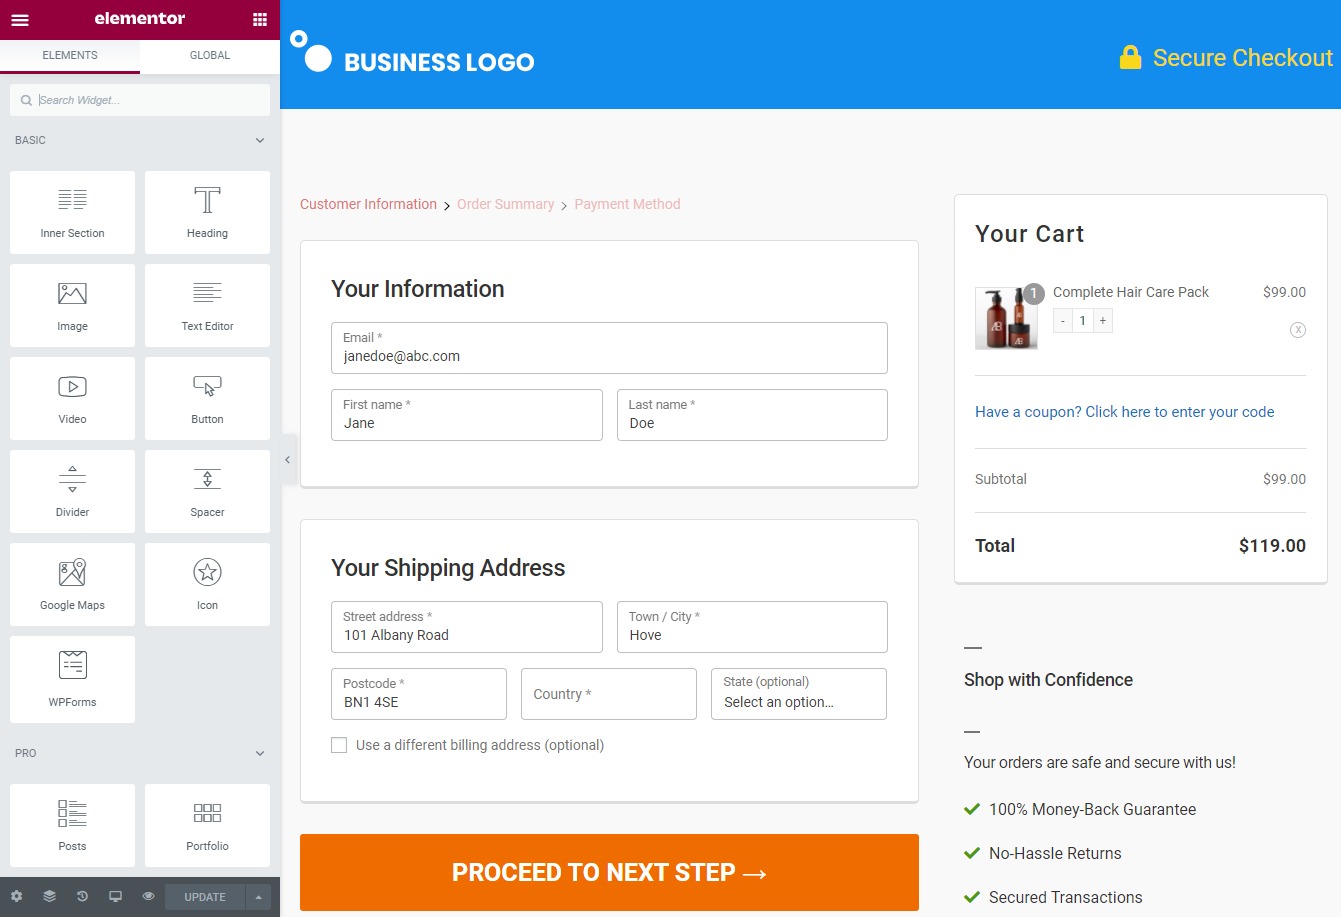 Step 2: Create an Optimized Checkout Page